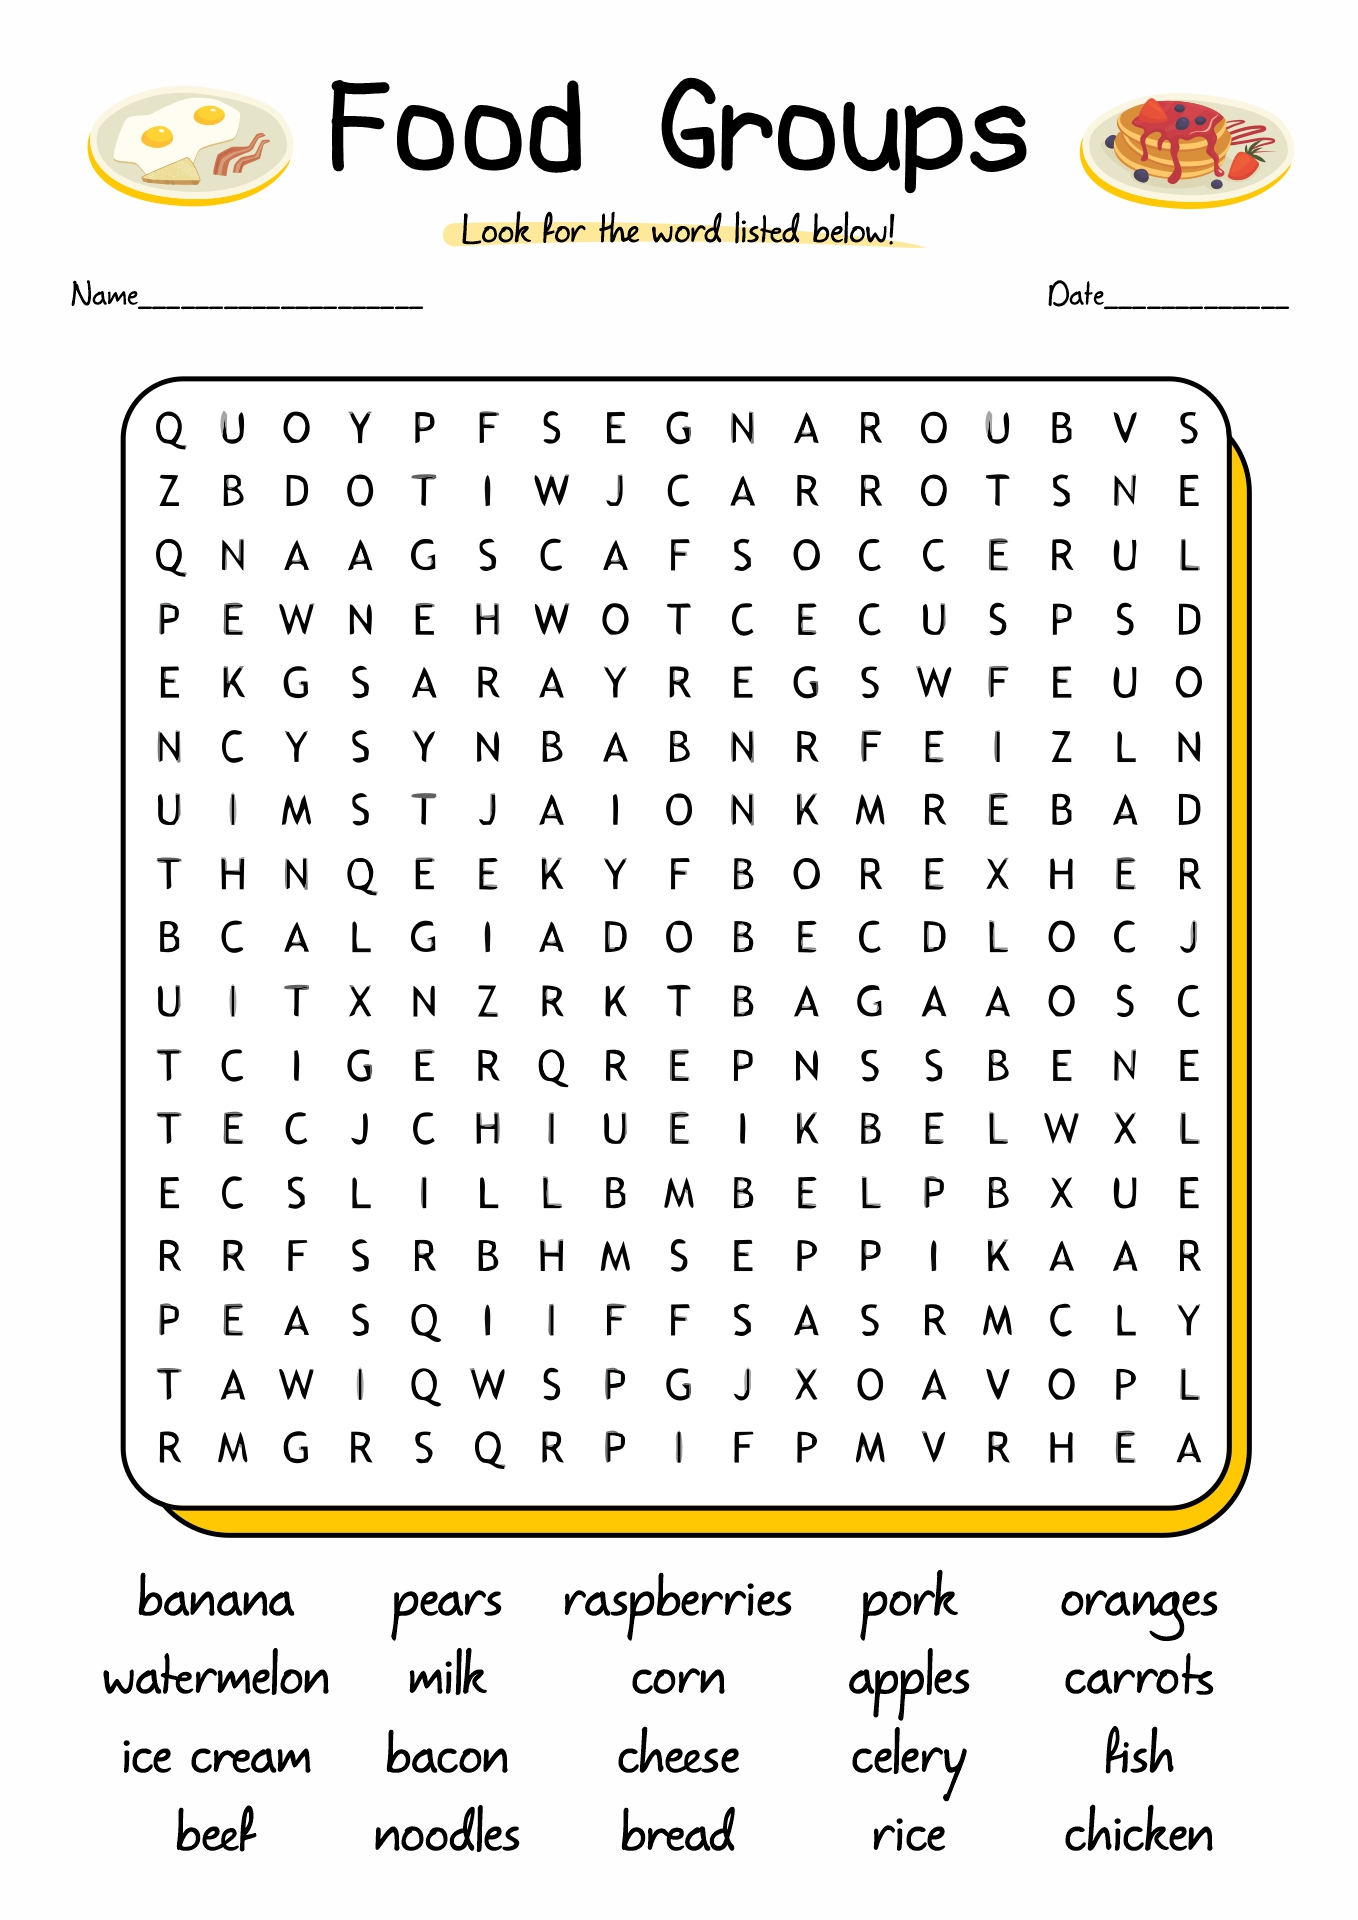 Five Food Groups Pyramid Word Search Worksheets Image